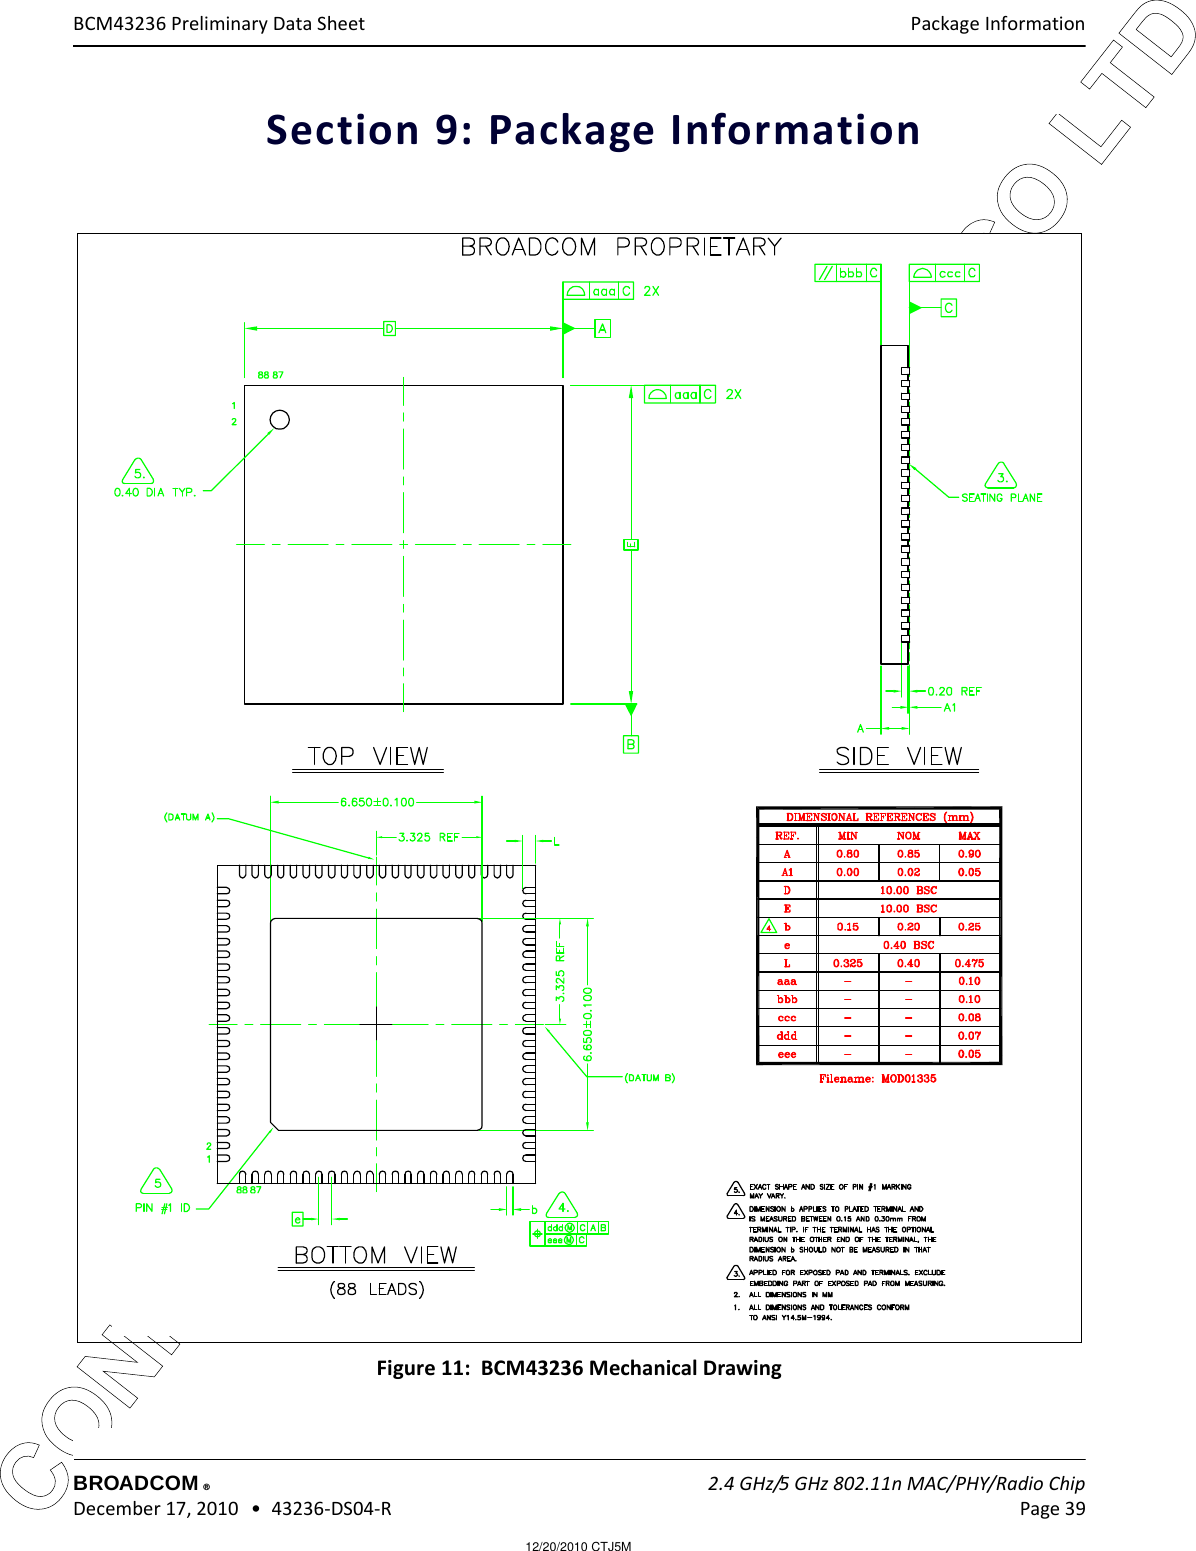 12/20/2010 CTJ5MCONFIDENTIAL FOR LG INNOTEK CO LTD Package InformationBROADCOM    2.4 GHz/5 GHz 802.11n MAC/PHY/Radio Chip December 17, 2010   •  43236-DS04-R Page 39®BCM43236 Preliminary Data SheetSection 9: Package Information  Figure 11:  BCM43236 Mechanical Drawing